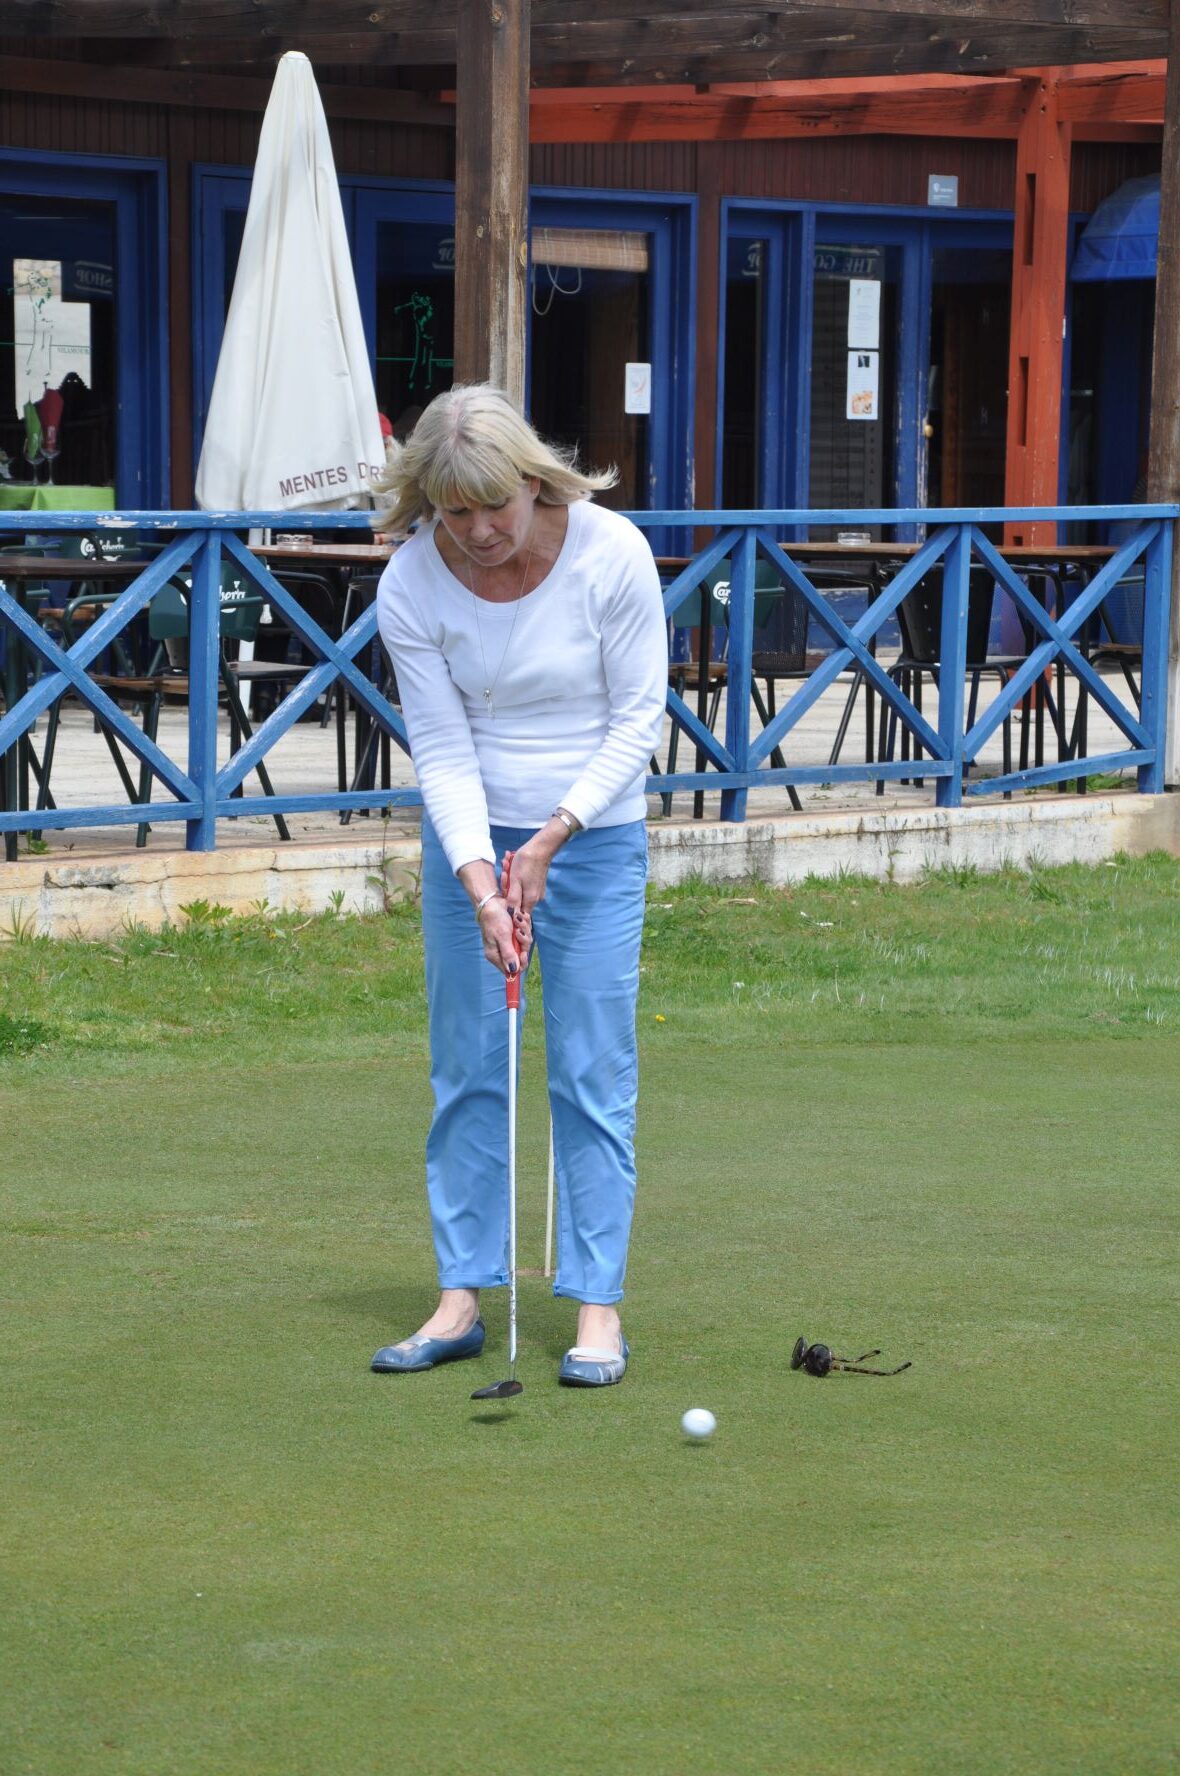 Angie's Mum on the putting green (she was a putting legend!)